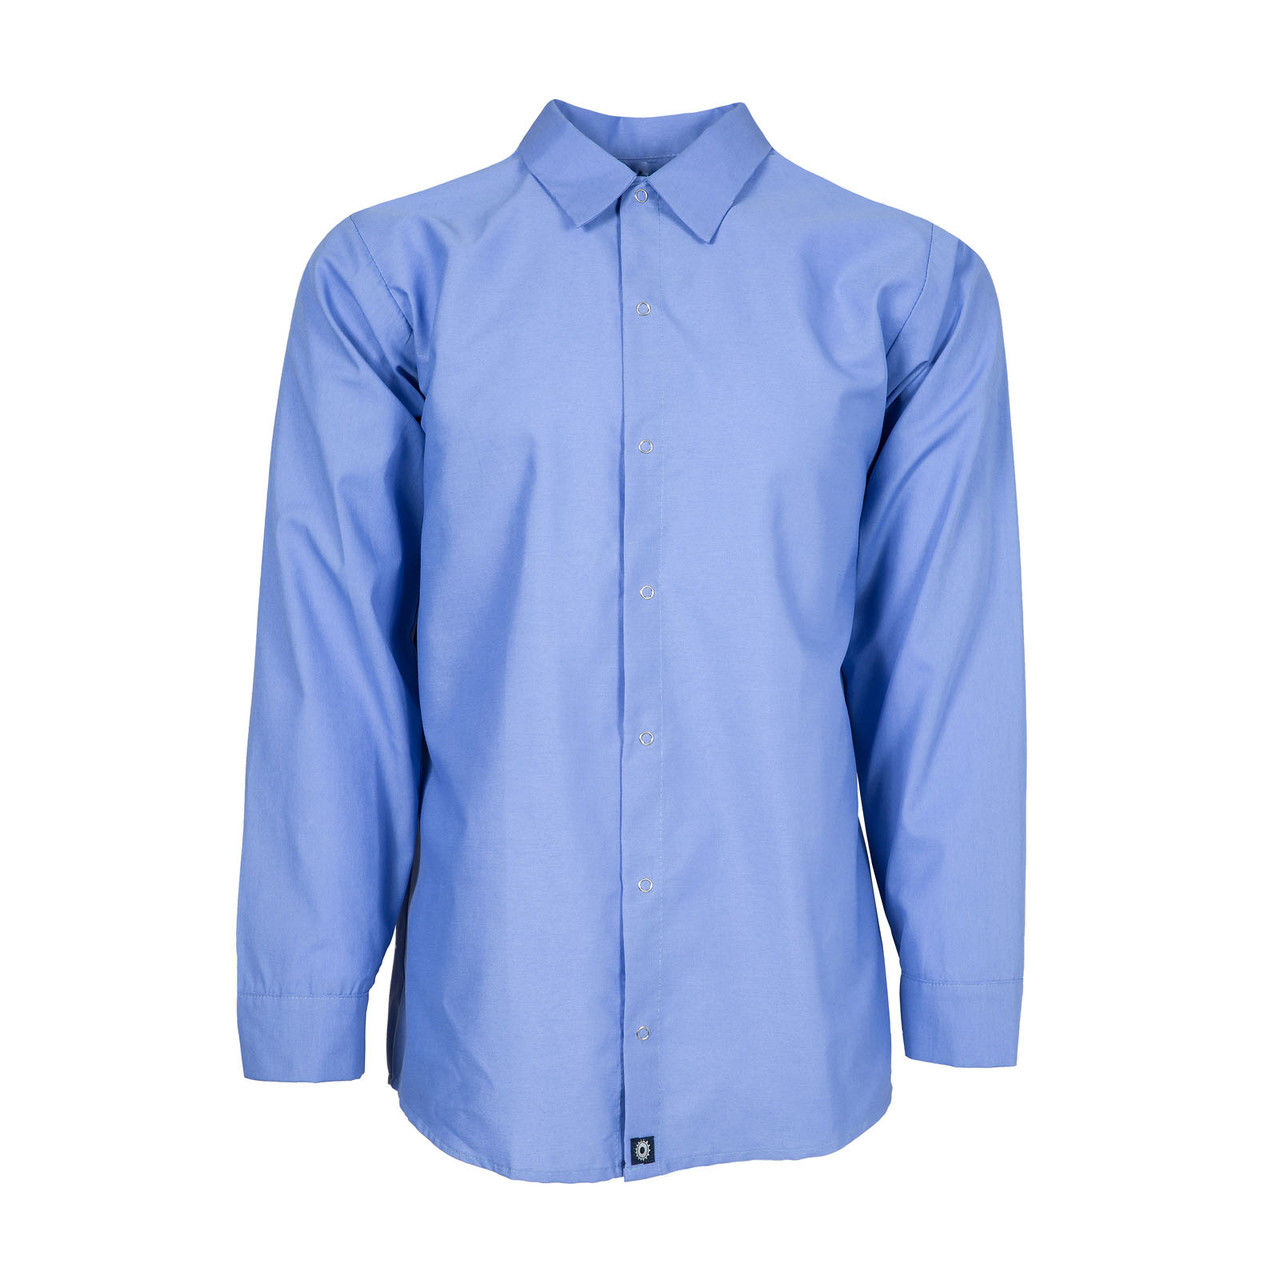 Does the Gulf Blue work shirt for women have pockets?